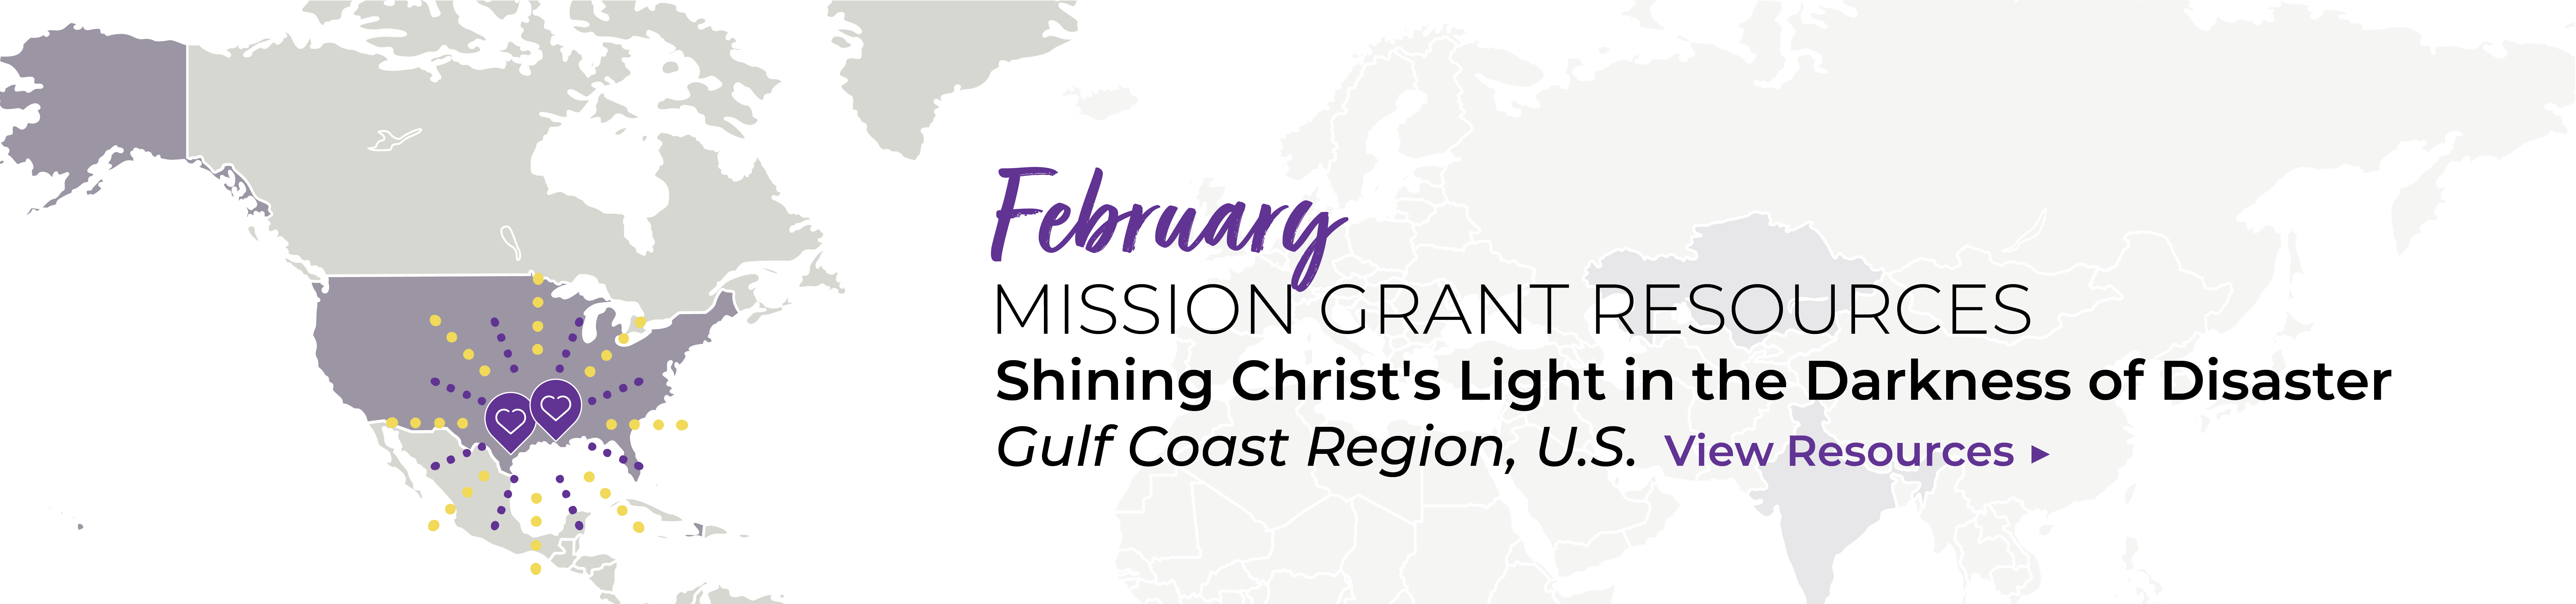 February Mission Grant Resources: Shining Christ's Light in the Darkness of Diasaster. View Resources.